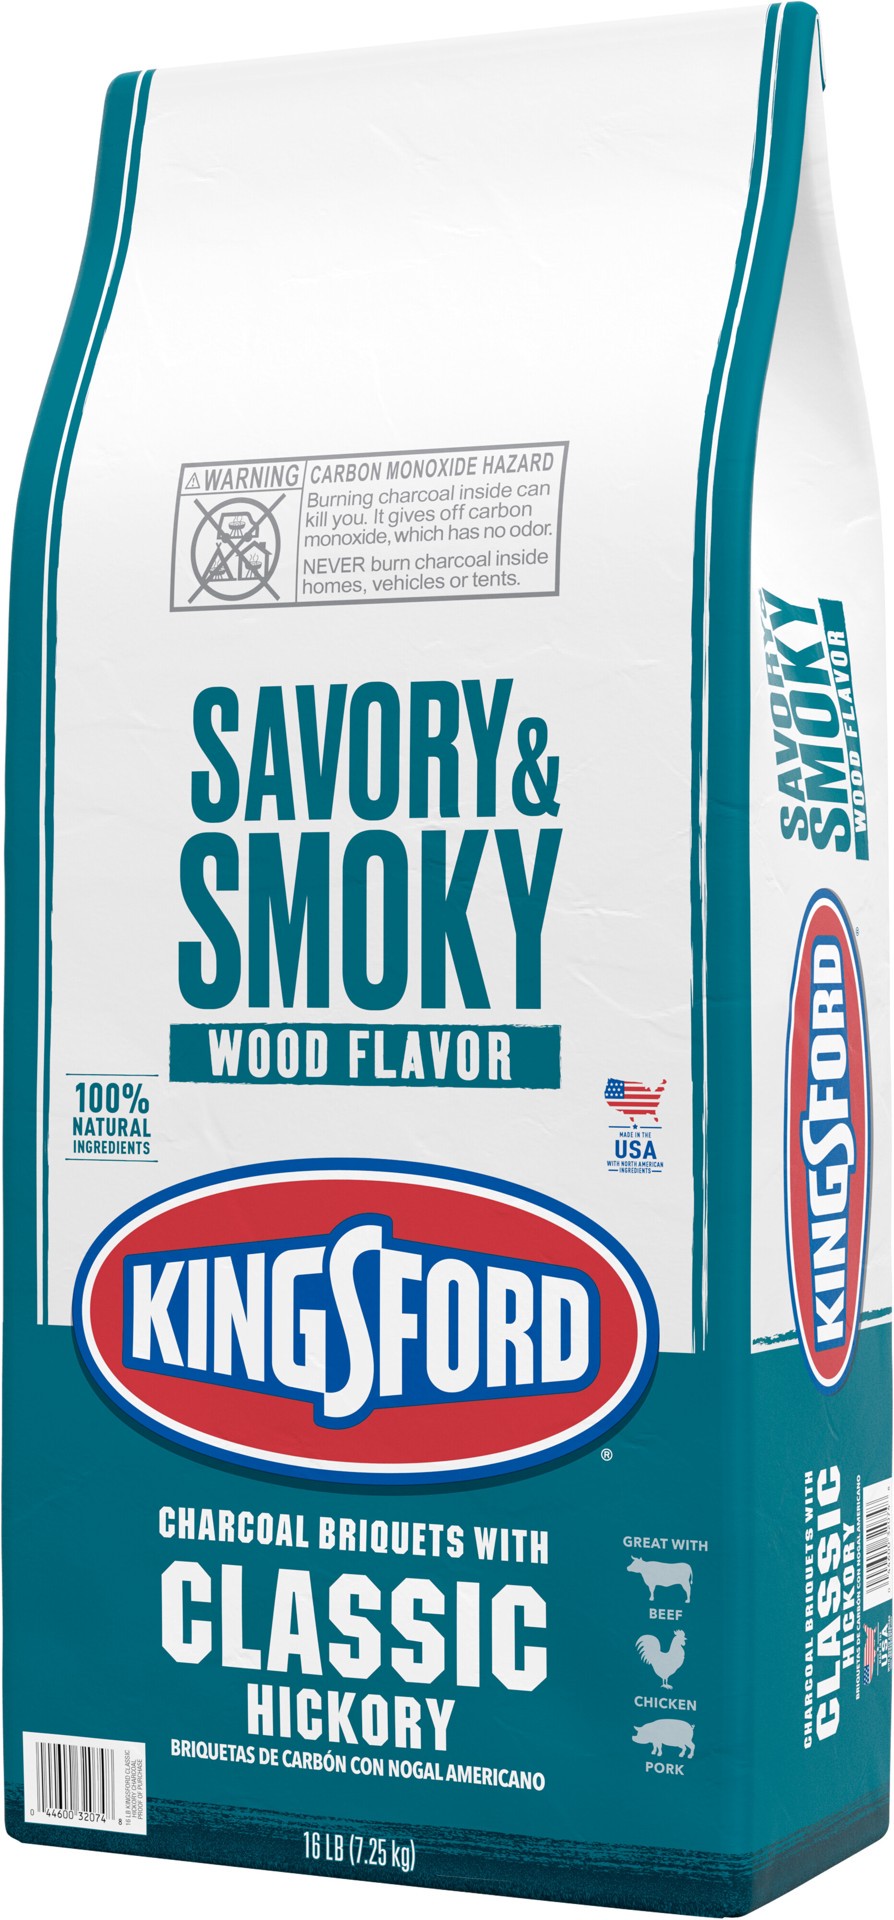 slide 3 of 5, Kingsford Charcoal with Classic Hickory Briquettes, 16 lb